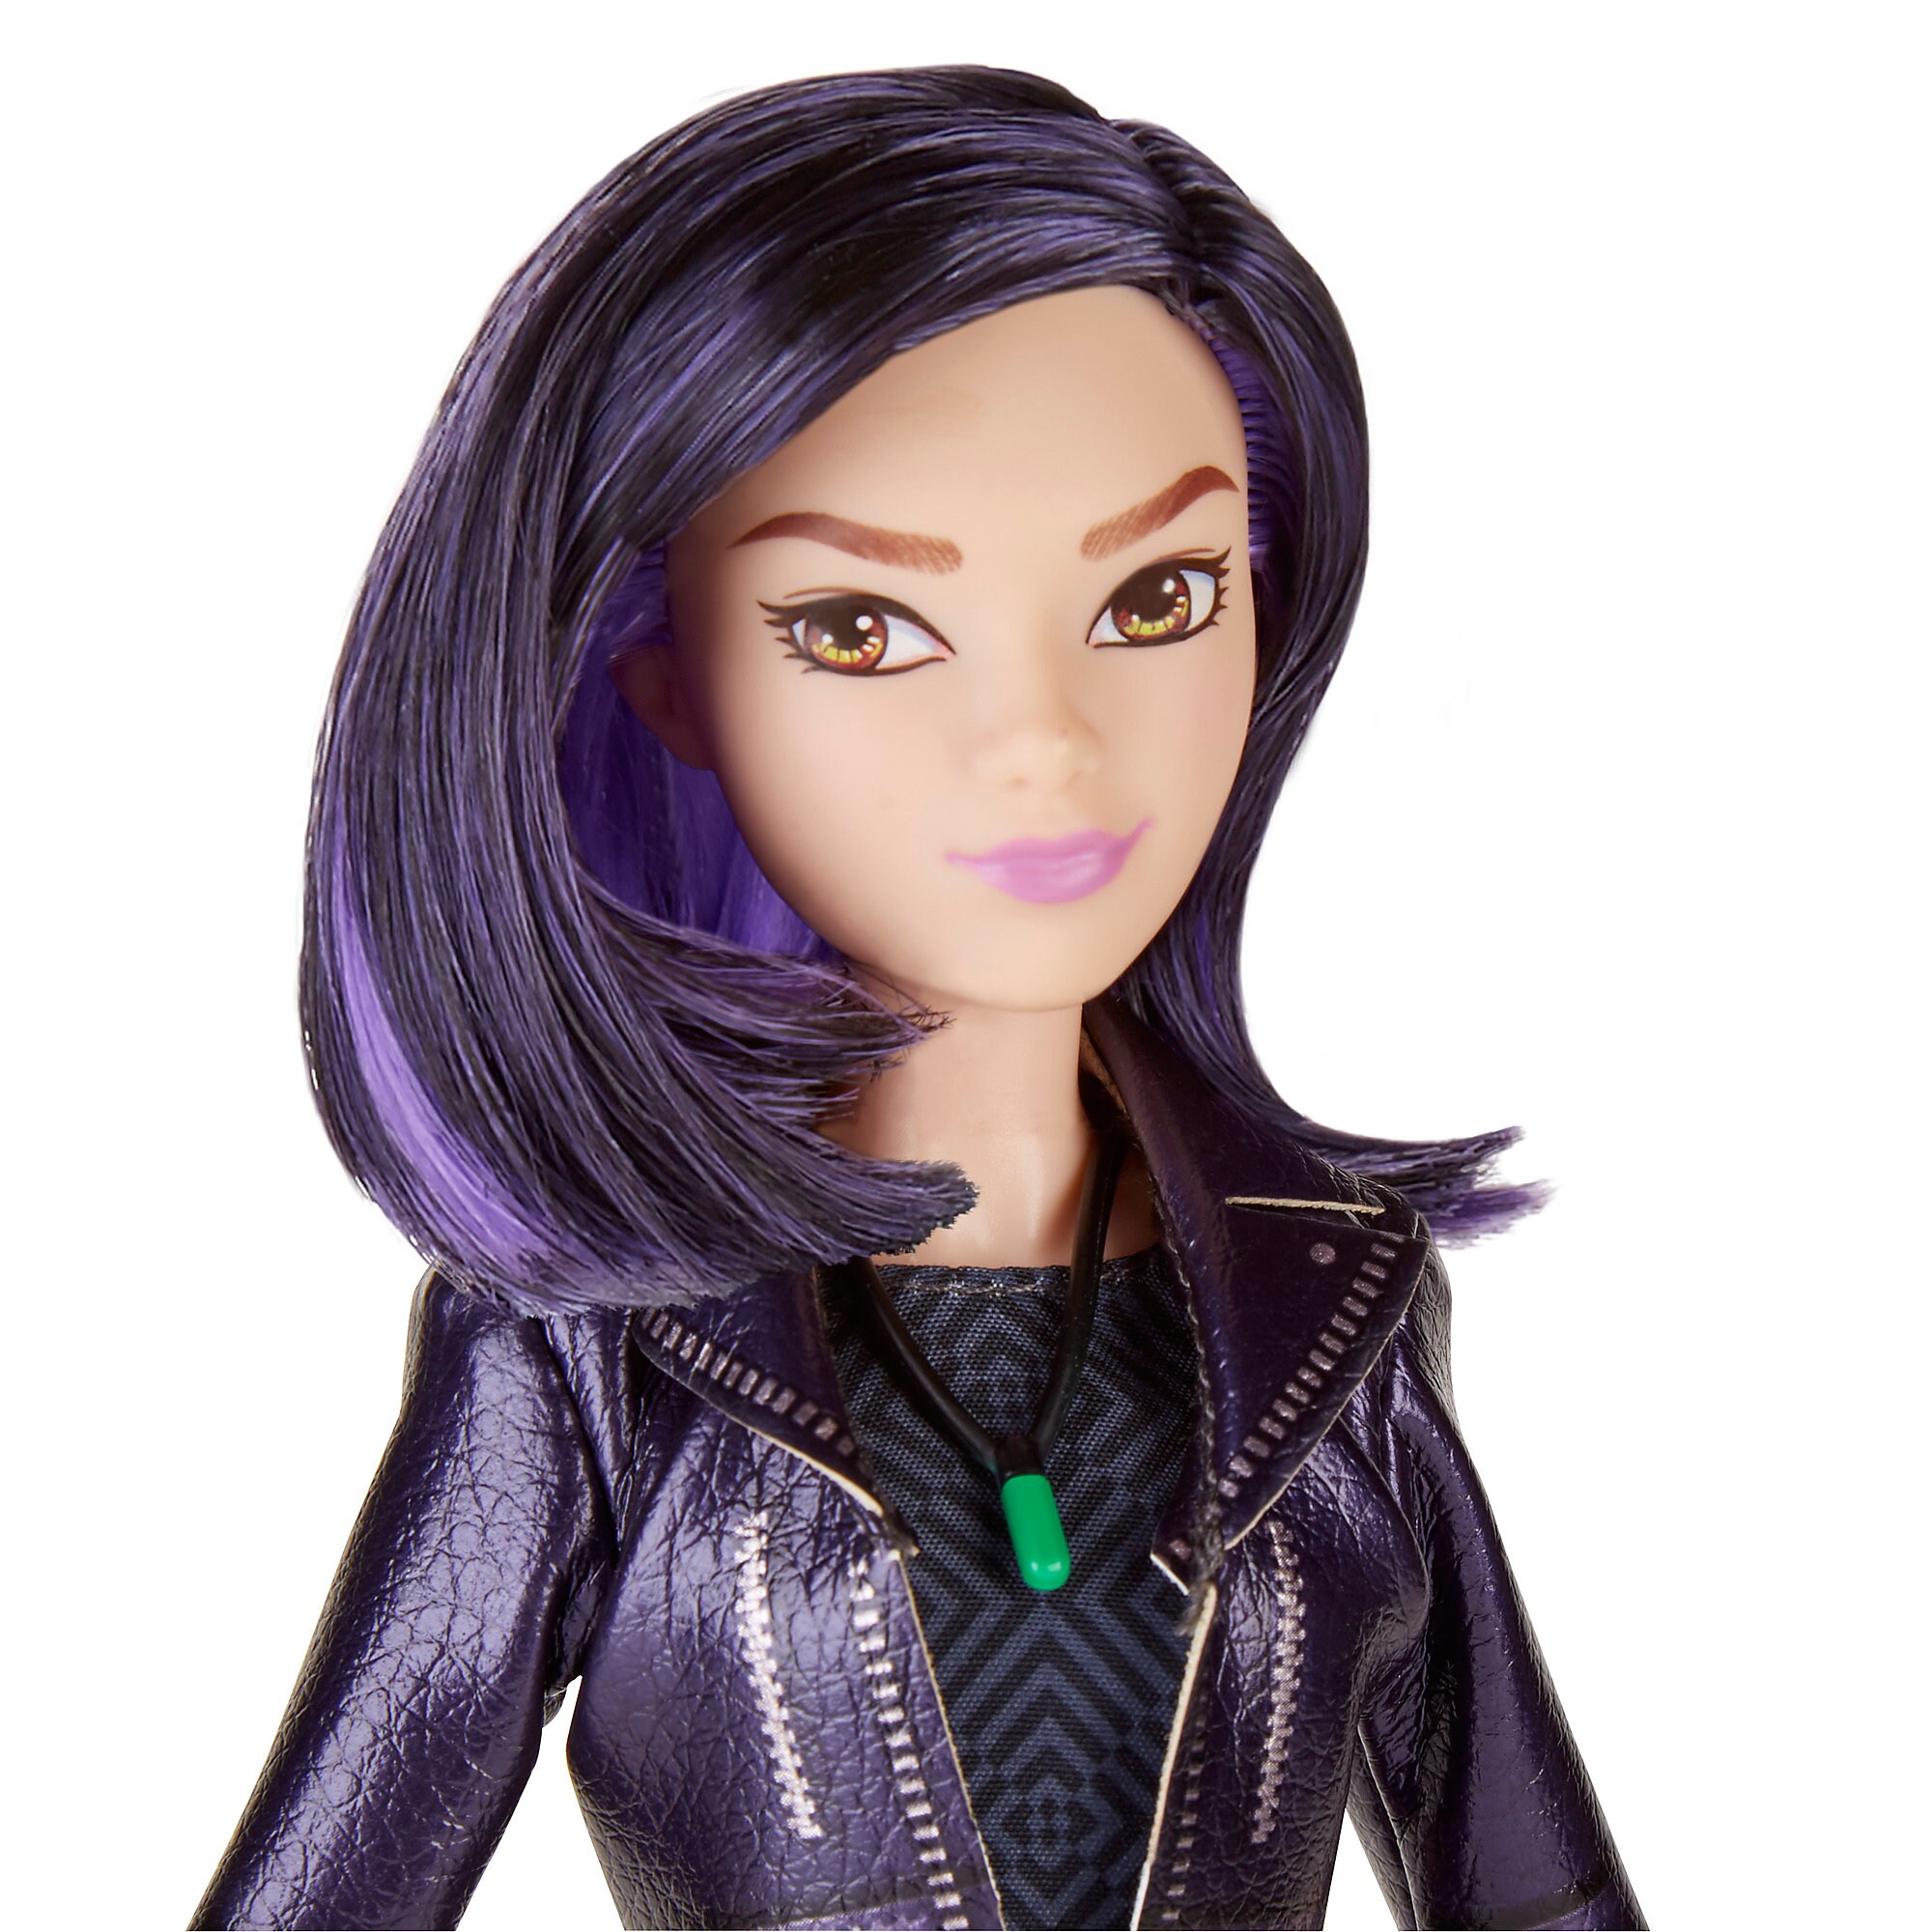 Quake Doll - Marvel Rising is now available for purchase – Dis ...